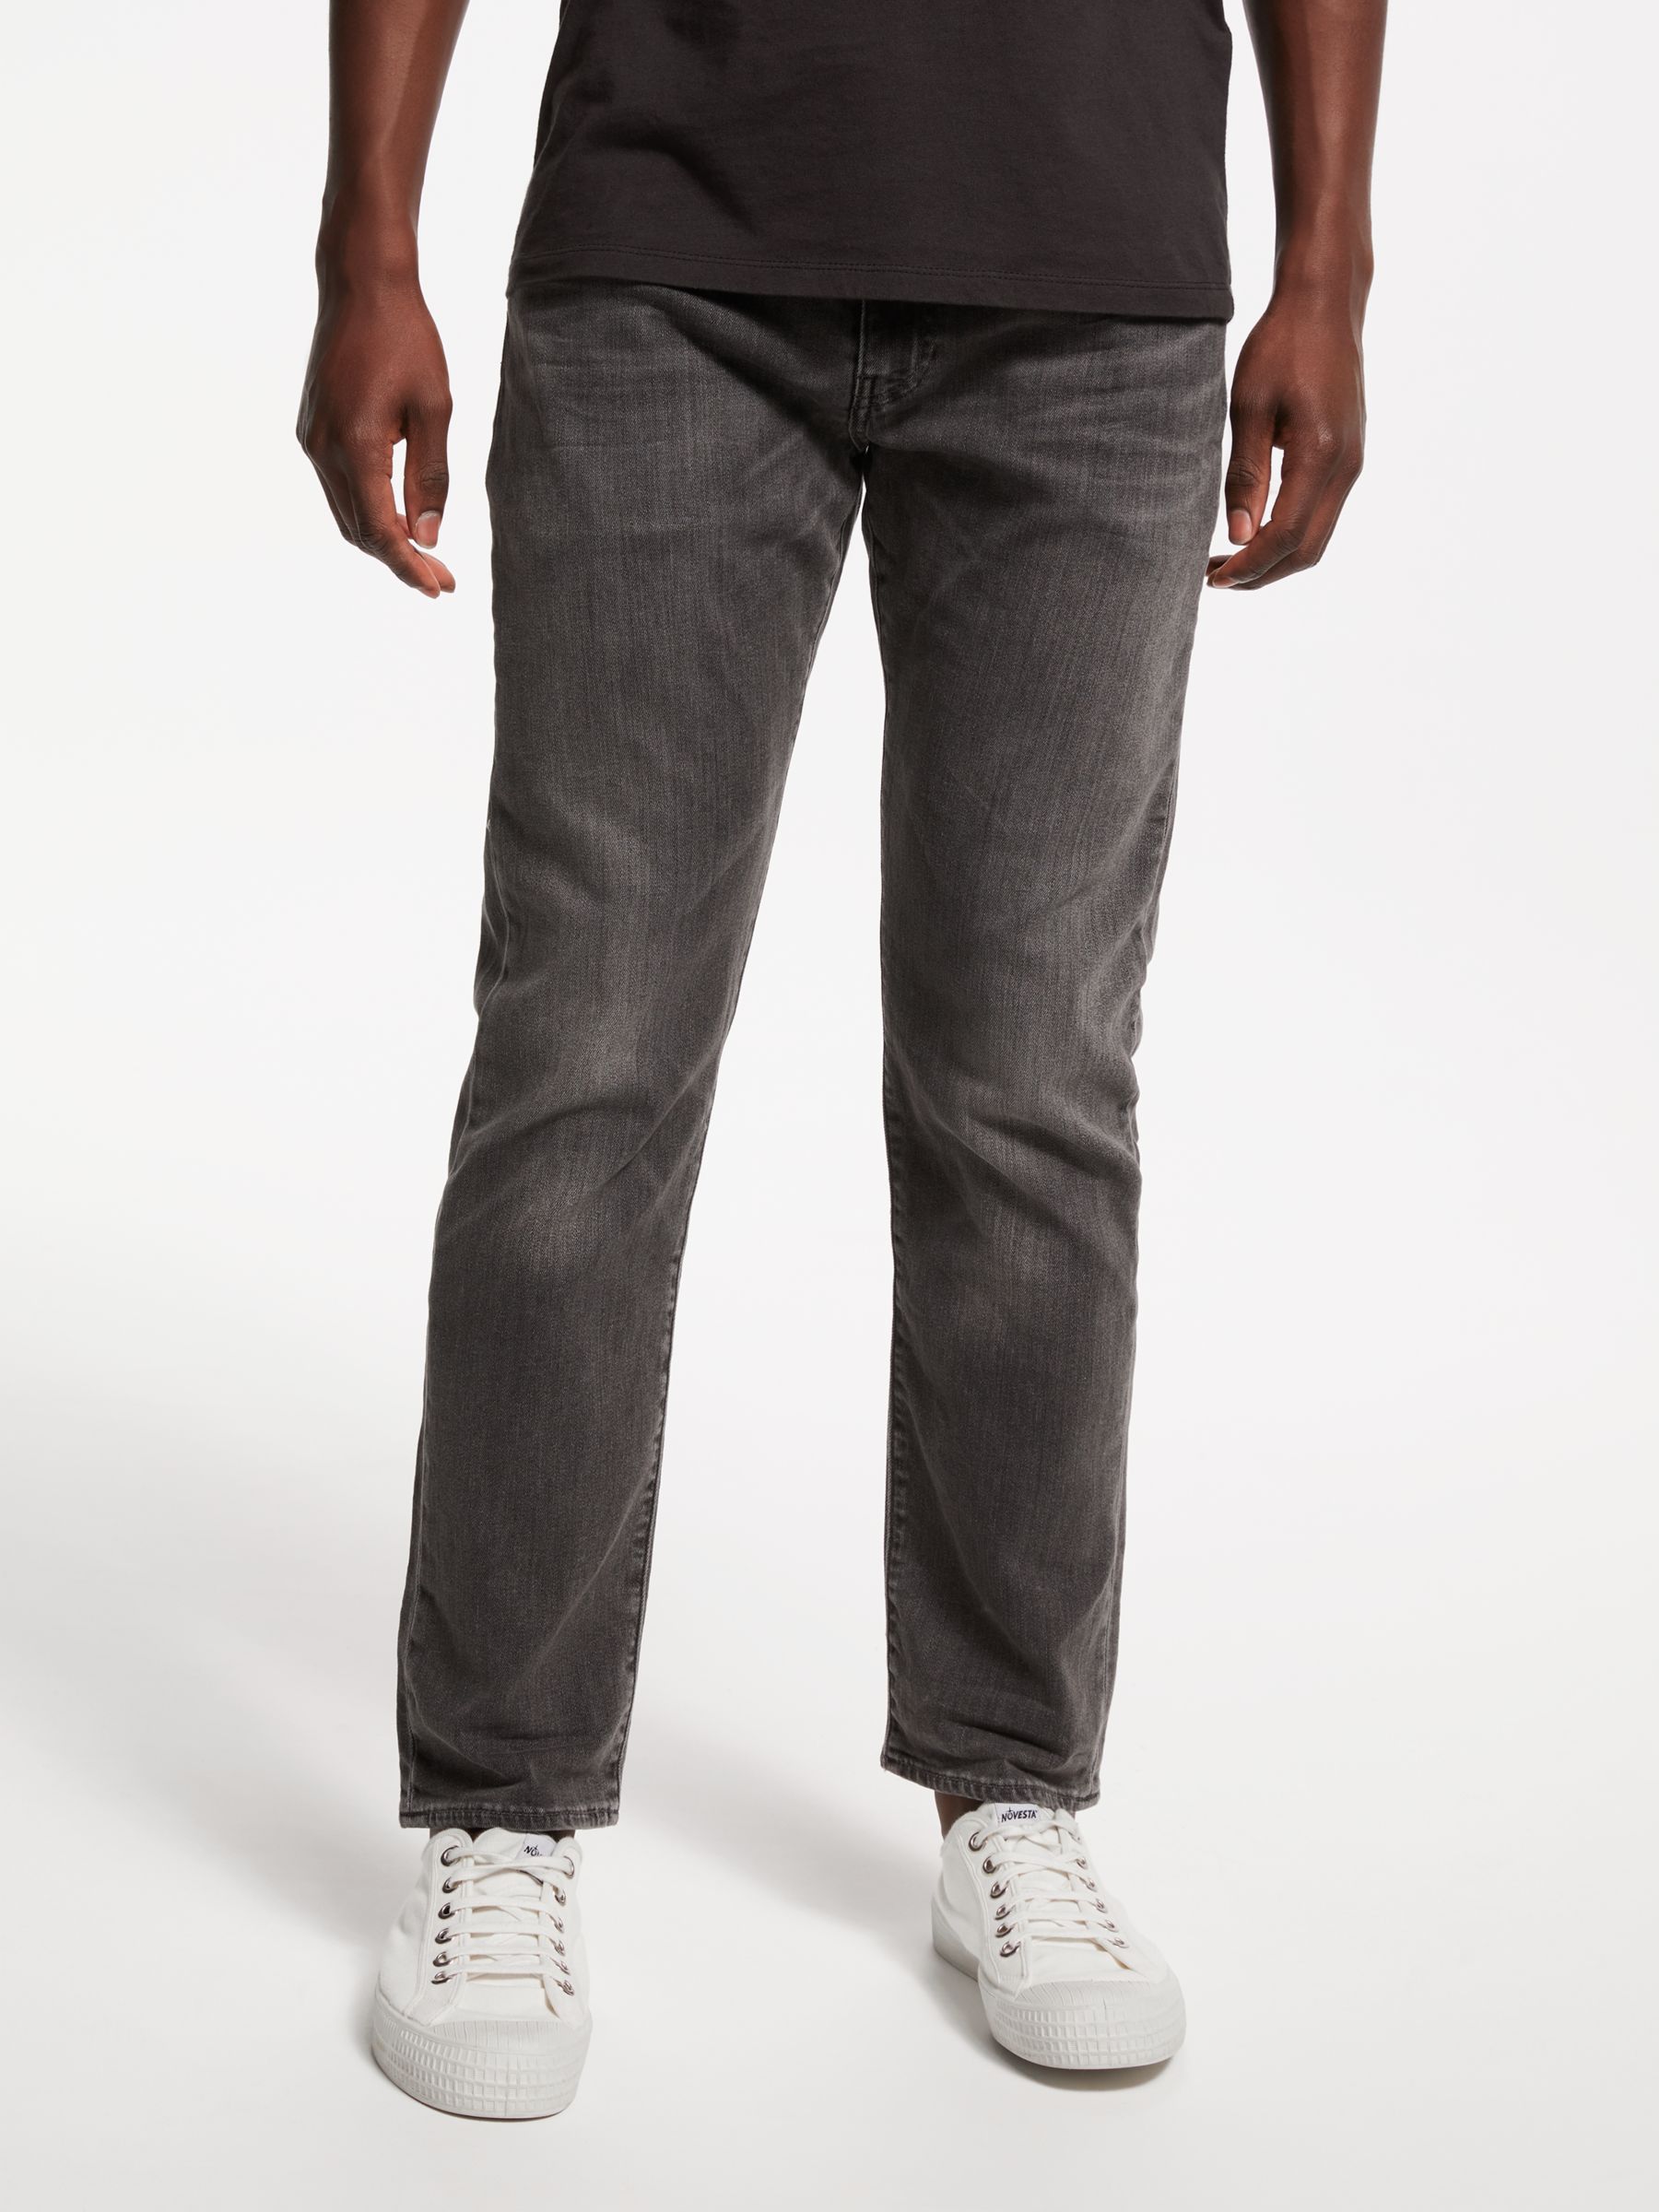 Levi's 502 Regular Tapered Jeans, Headed South